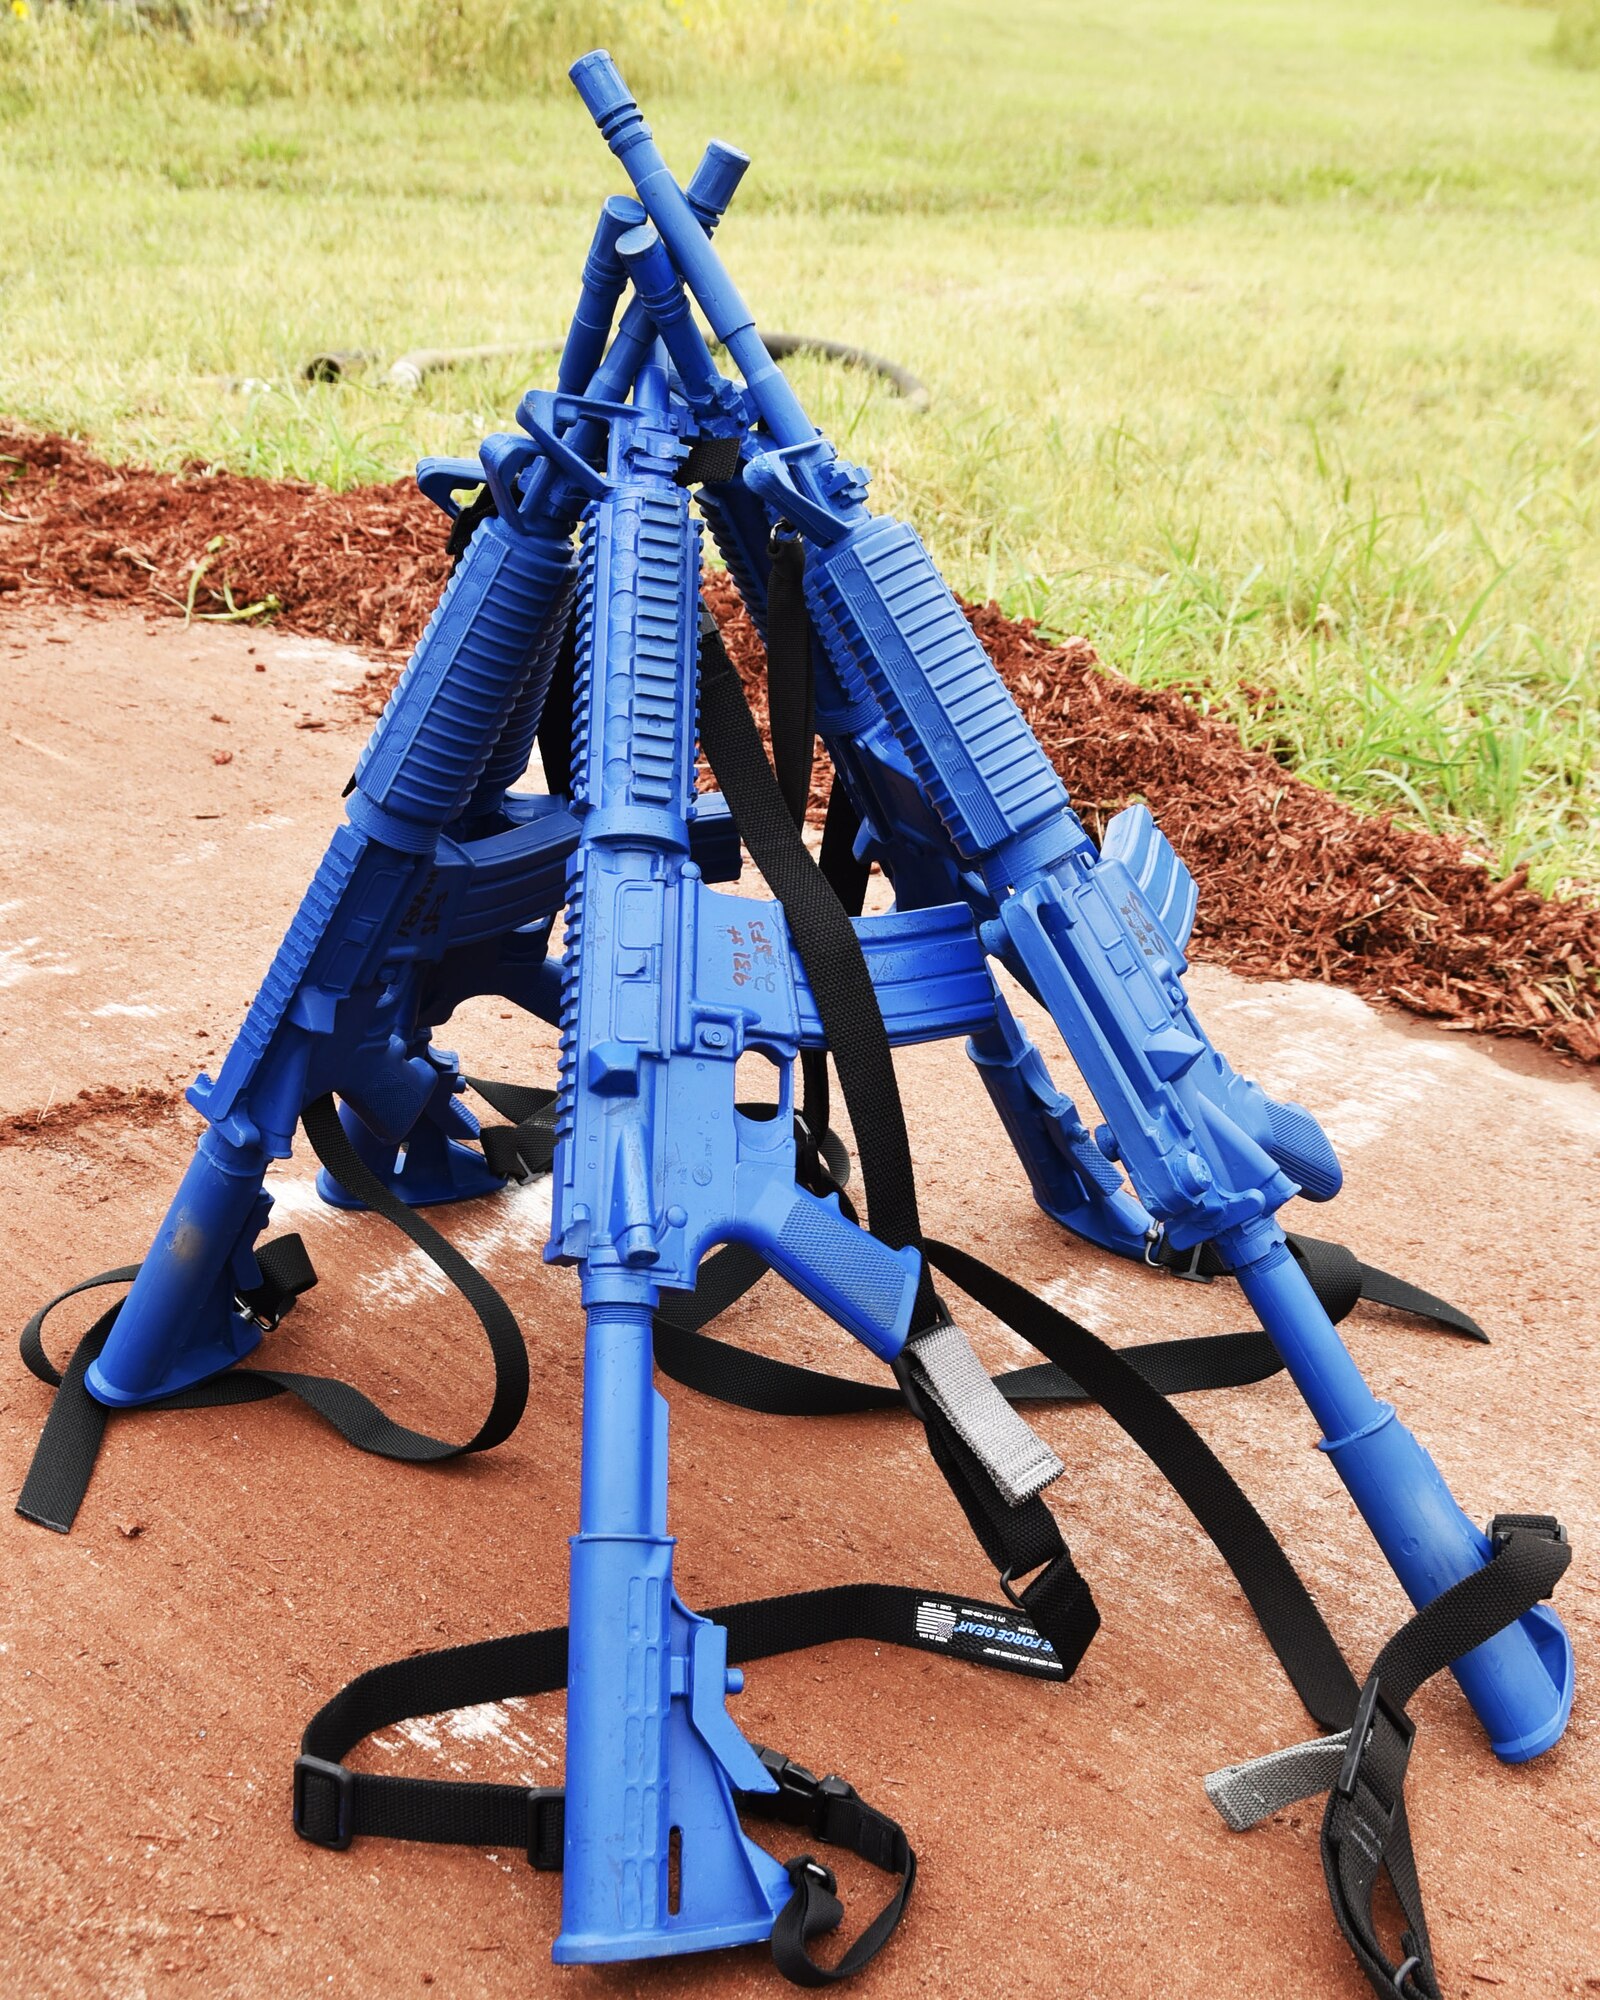 A collection of M4 assault rifle replicas arranged by Airmen of the 931st Civil Engineer Squadron, sits nearby during a 931st Air Refueling Wing operational exercise Sept. 11, 2020, at McConnell Air Force Base, Kansas.  The rubber ducks are in the shape of an M4 rifle, and are issued during operational readiness exercises to add realism to the training.